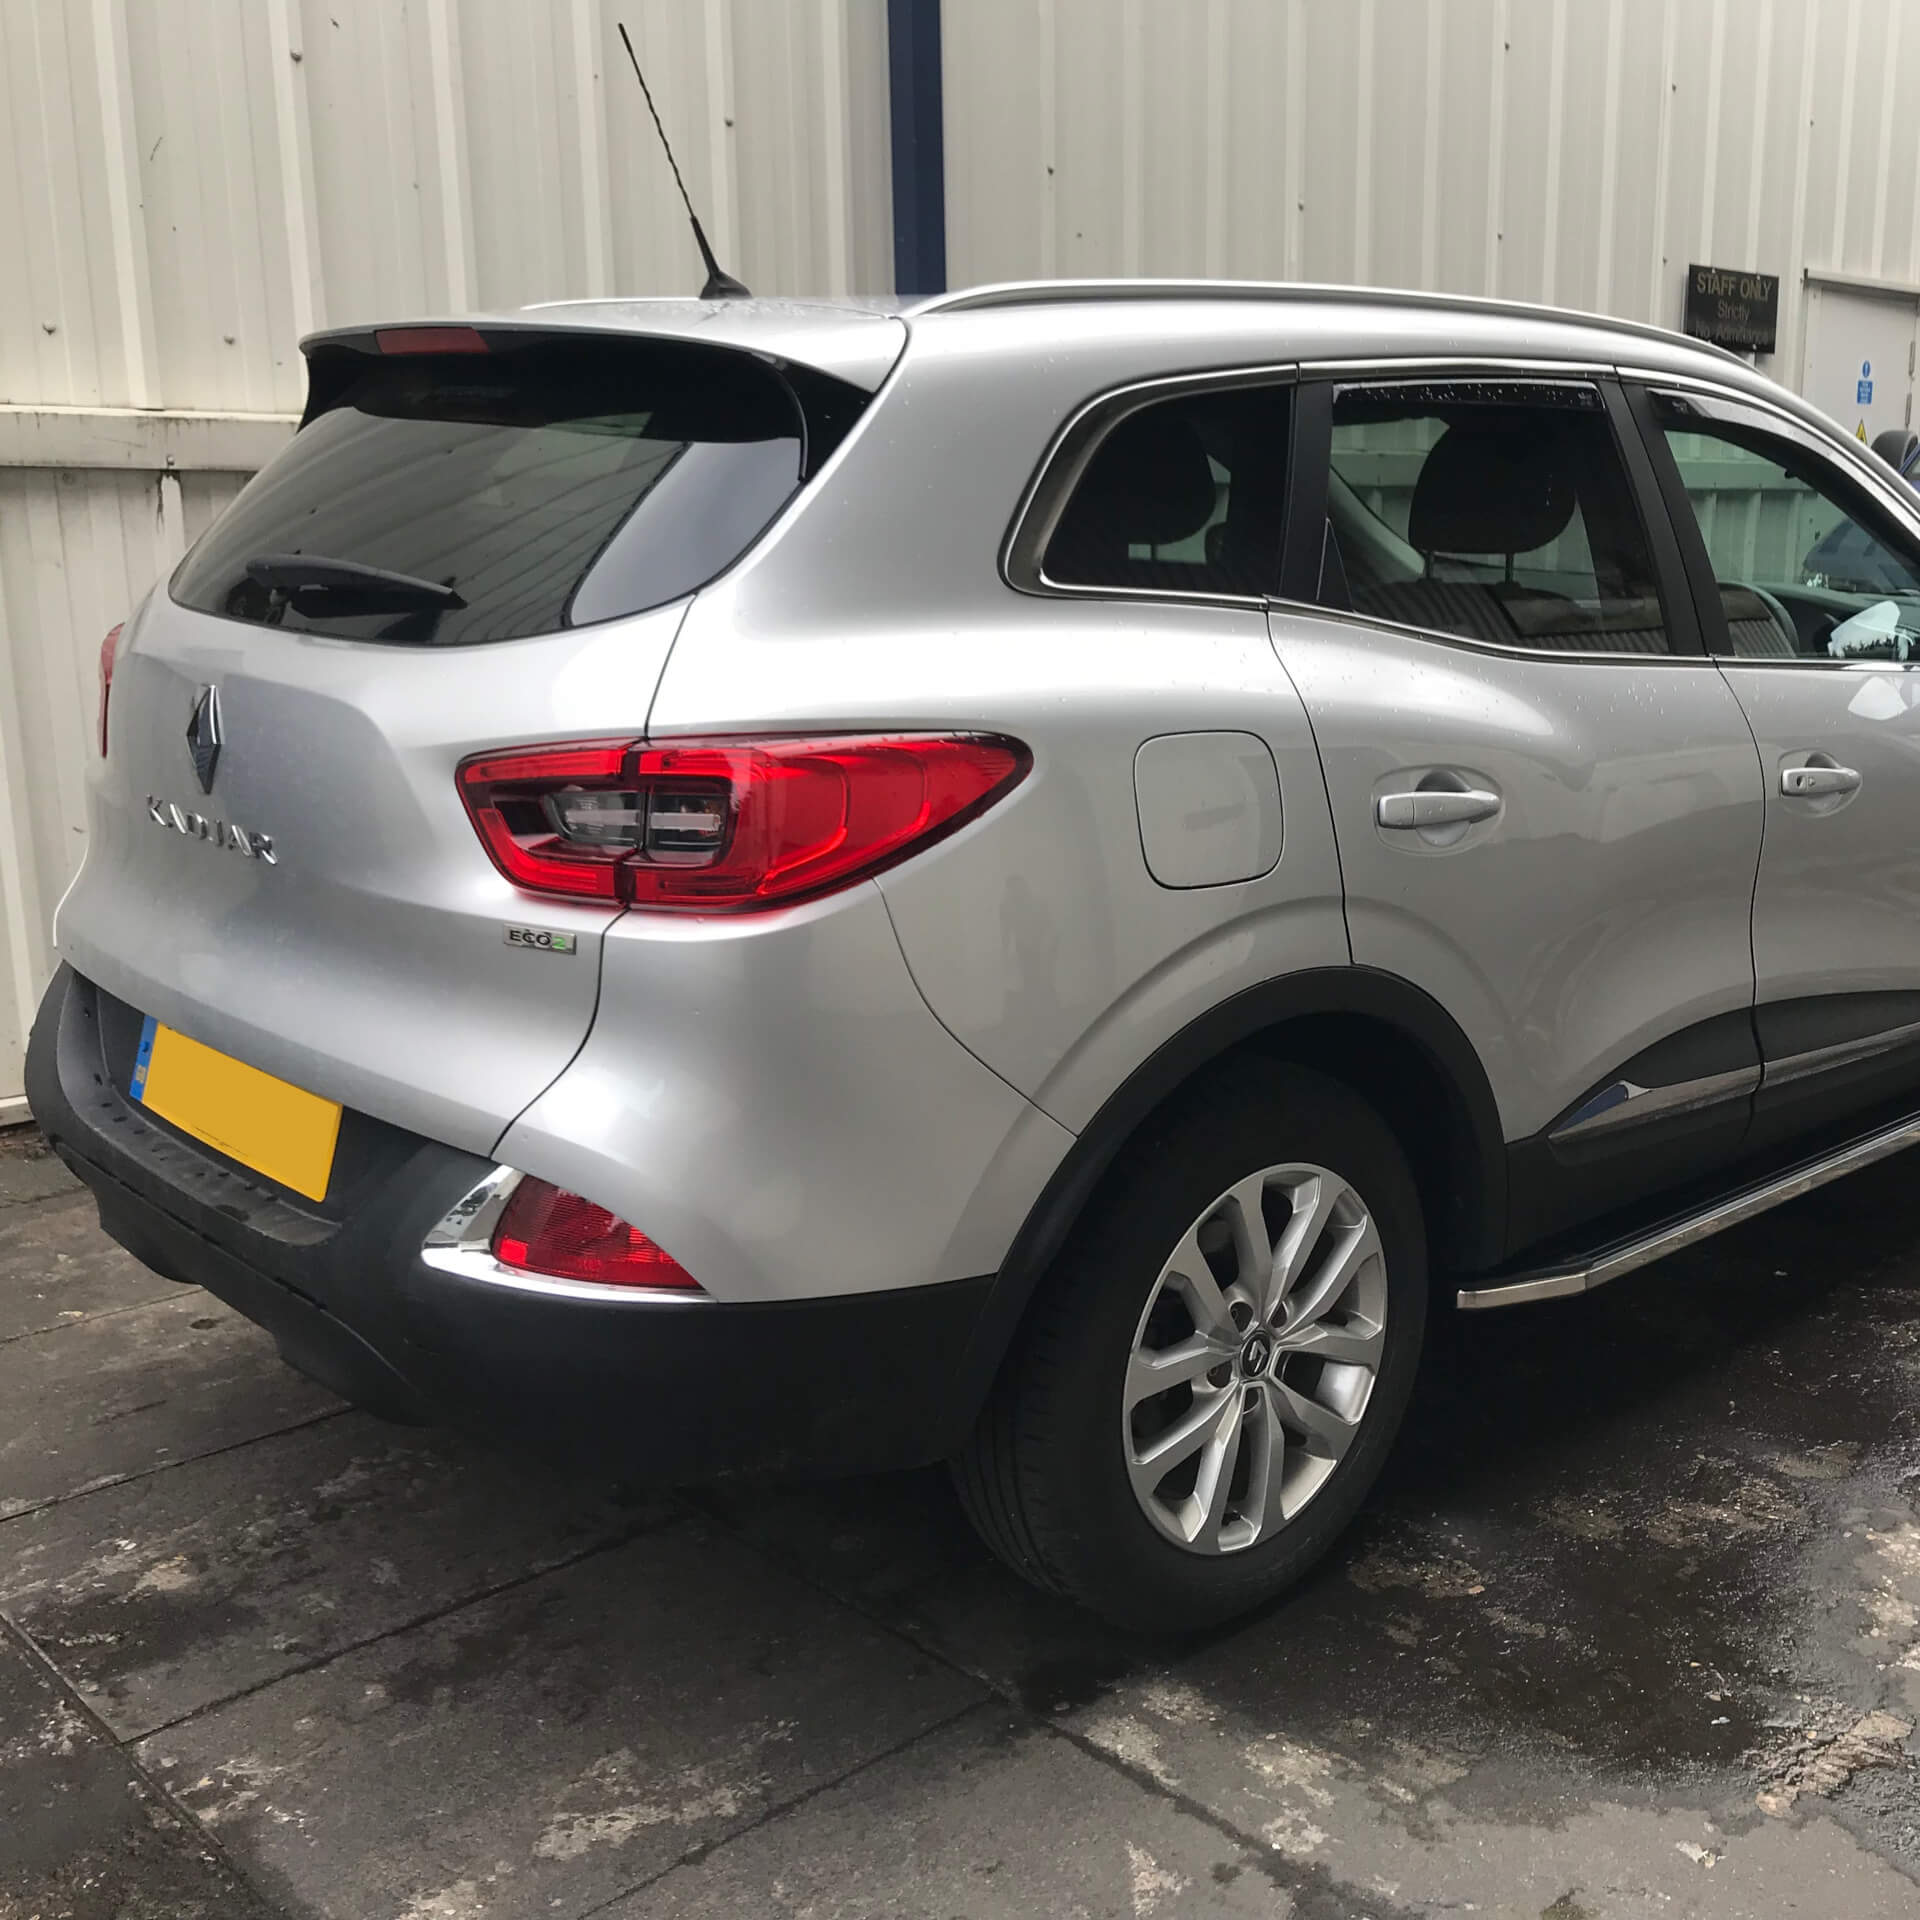 Direct4x4 accessories for Renault Kadjar vehicles with a photo of the back of a silver Renault Kadjar fitted with Raptor style side steps at our Derby depot